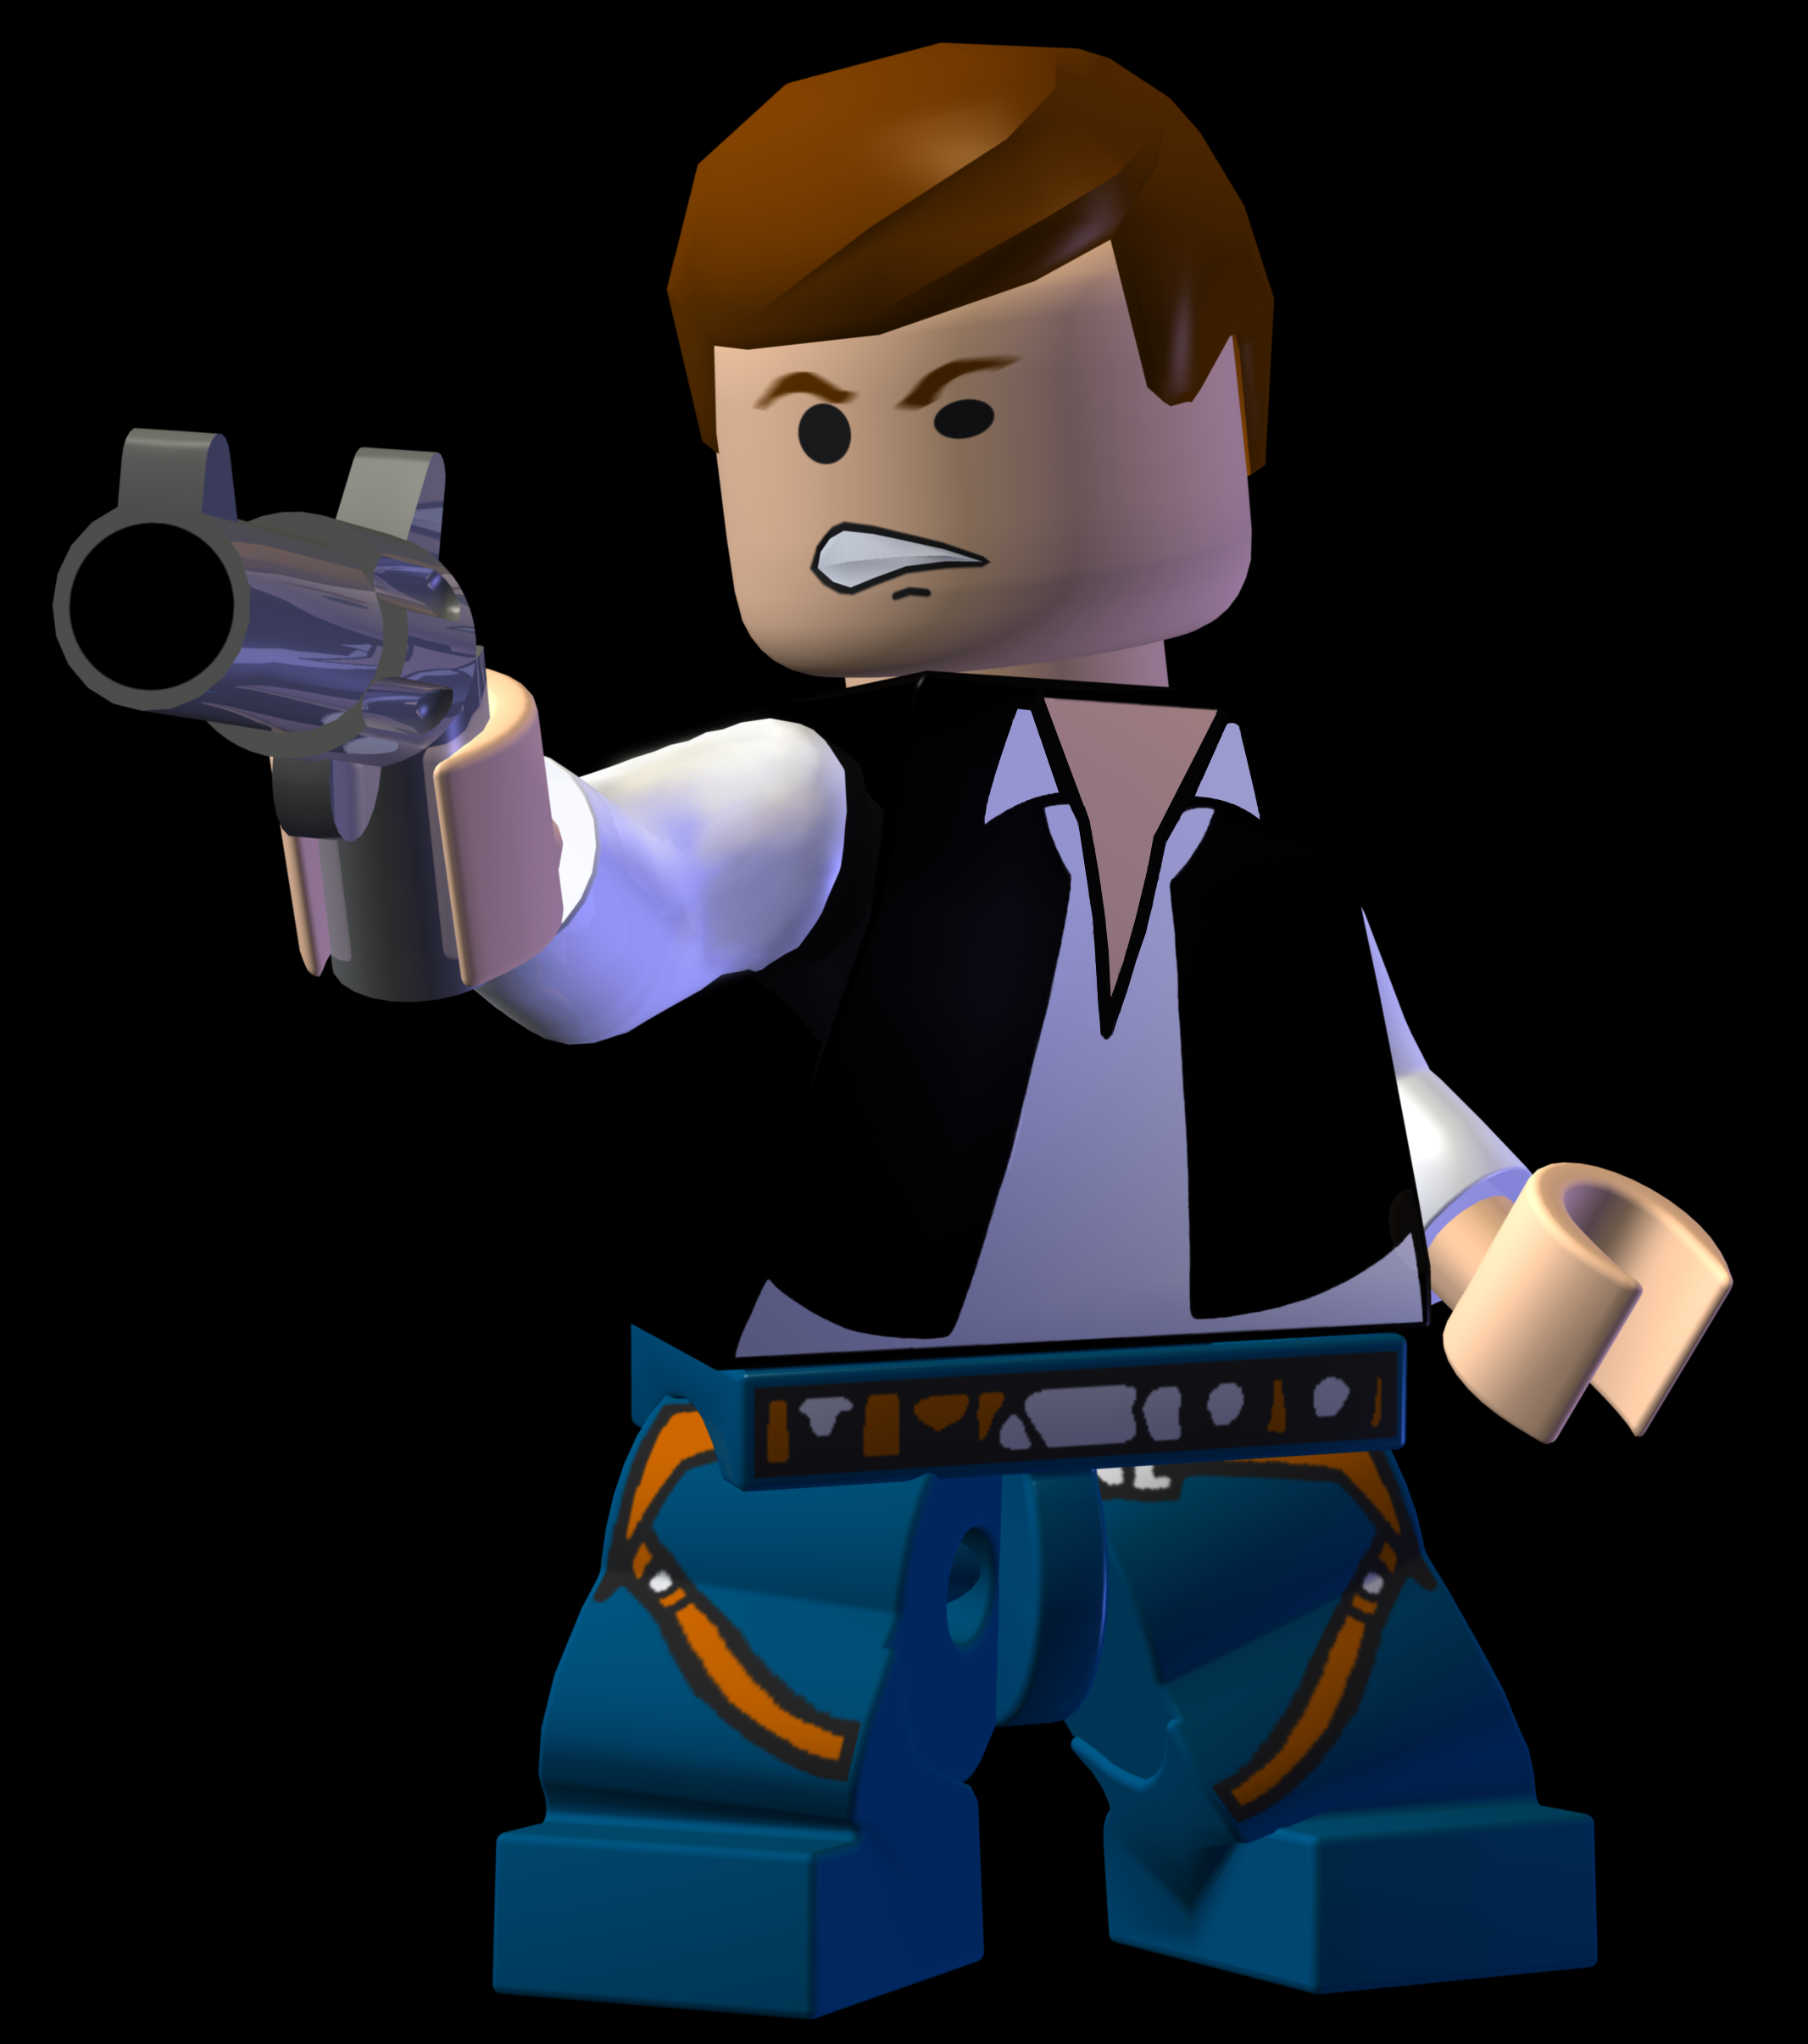 From Lego to Han Solo